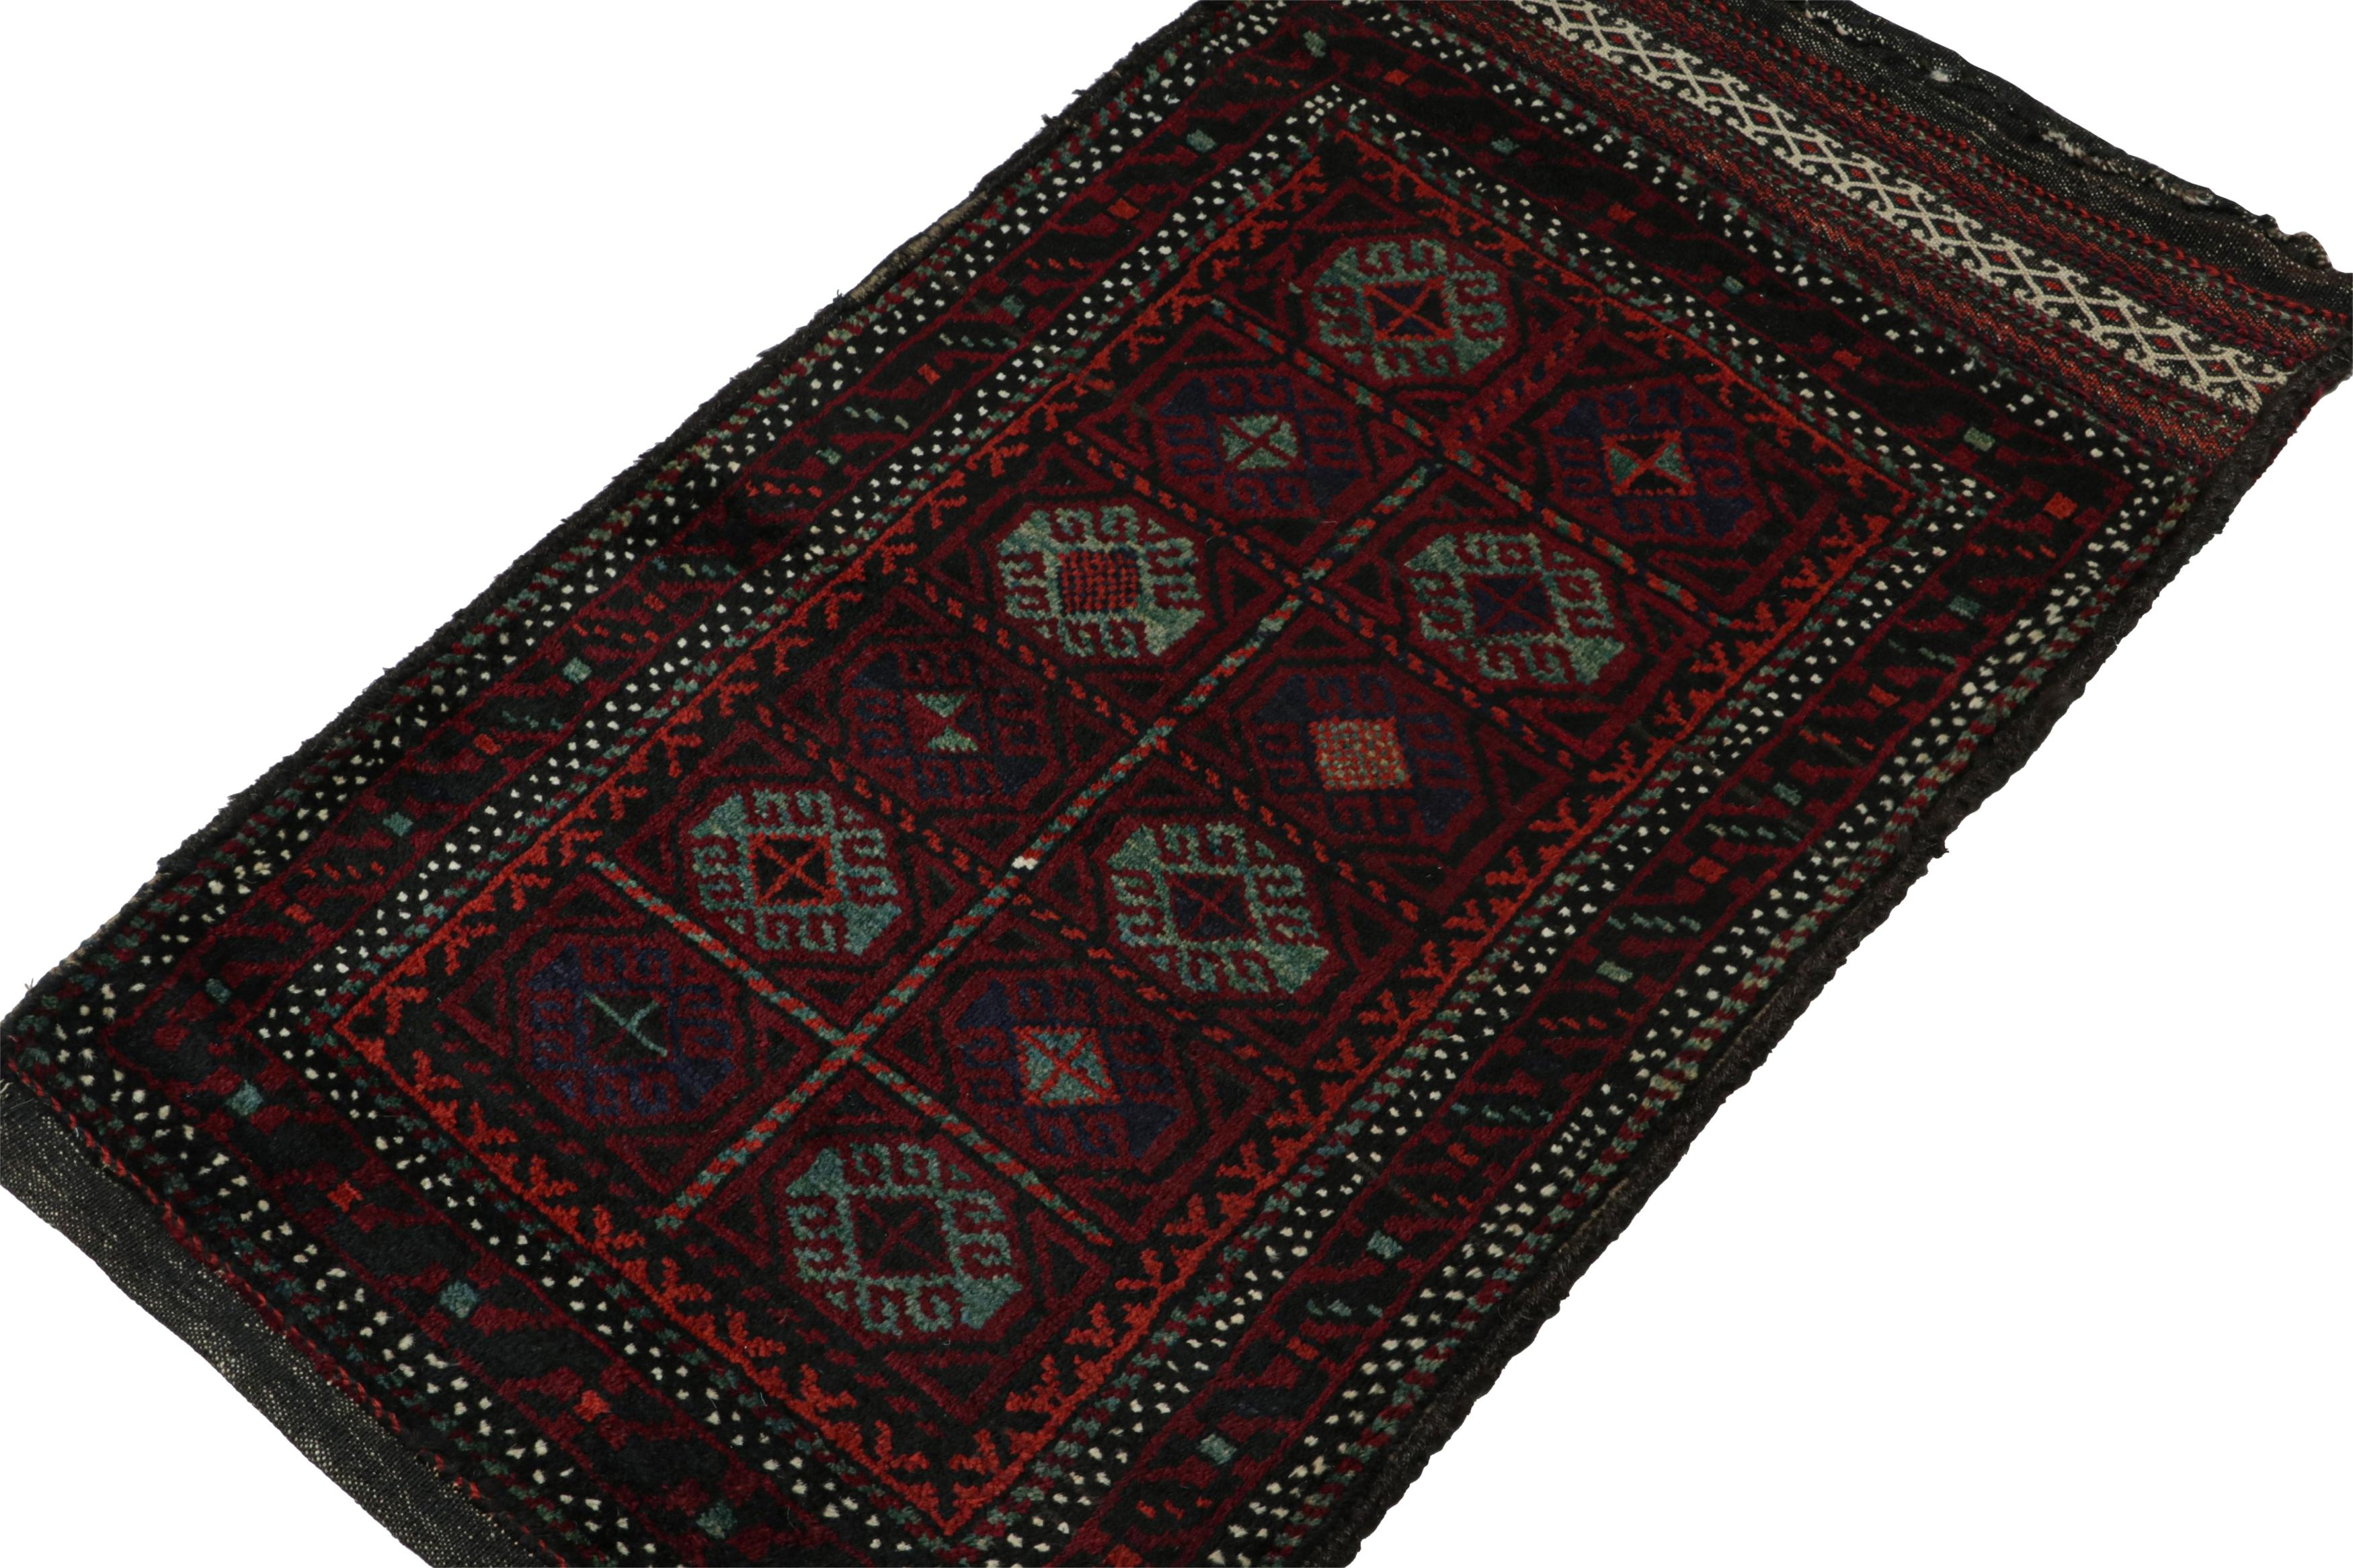 Hand-knotted in wool, this 2x4 Baluch Persian rug of the 1950s is the latest to enter Rug & Kilim’s Antique & Vintage collection.

On the Design:

The vintage Baluch rug carries tribal patterns encased in octagons relishing black, white, green, blue